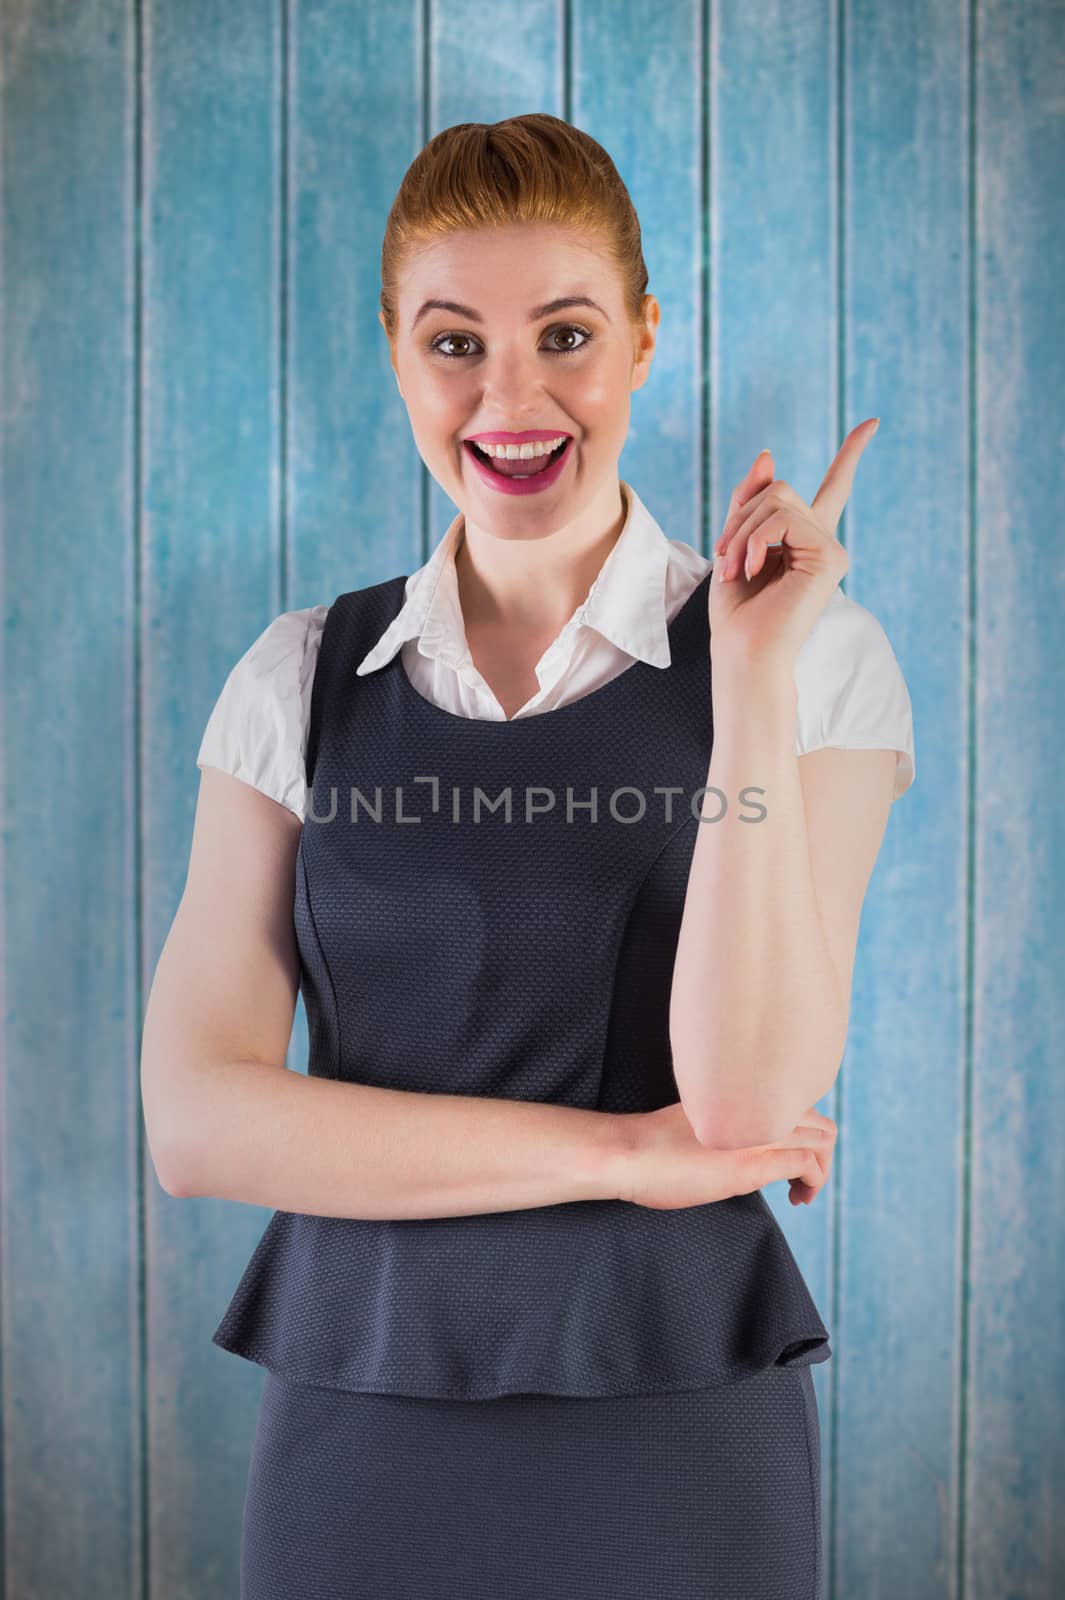 Composite image of redhead businesswoman pointing and smiling by Wavebreakmedia